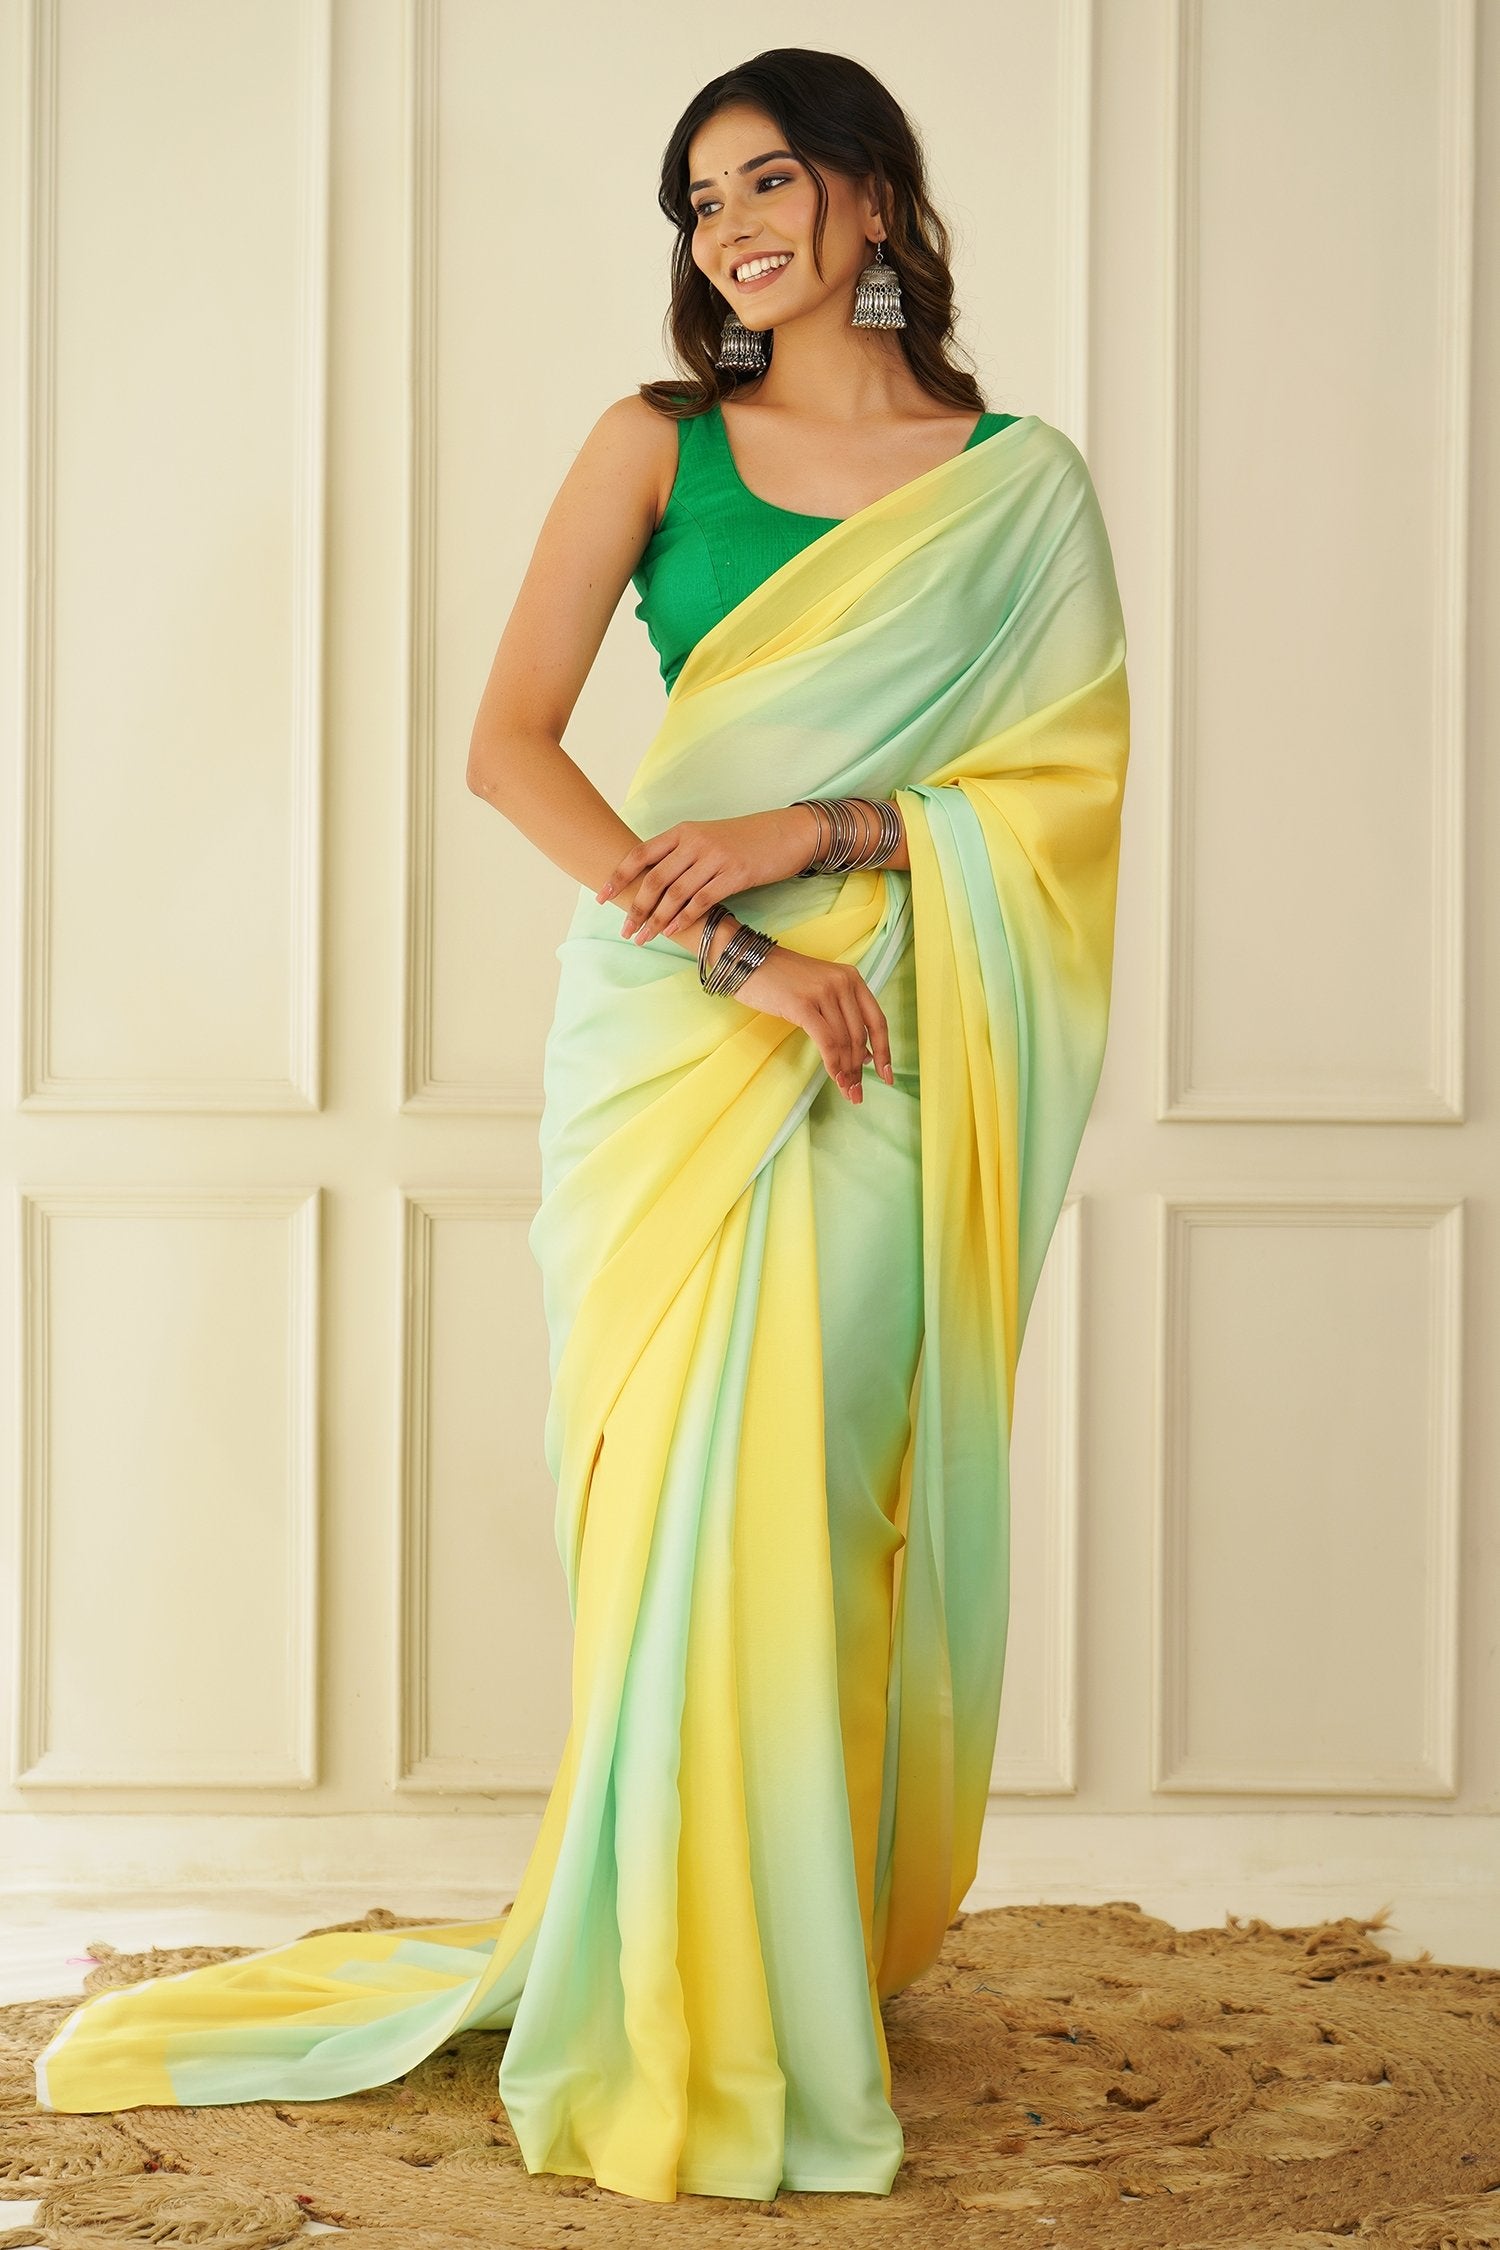 Buy MySilkLove Cream Can Yellow and Green Crepe Silk Georgette Saree Online